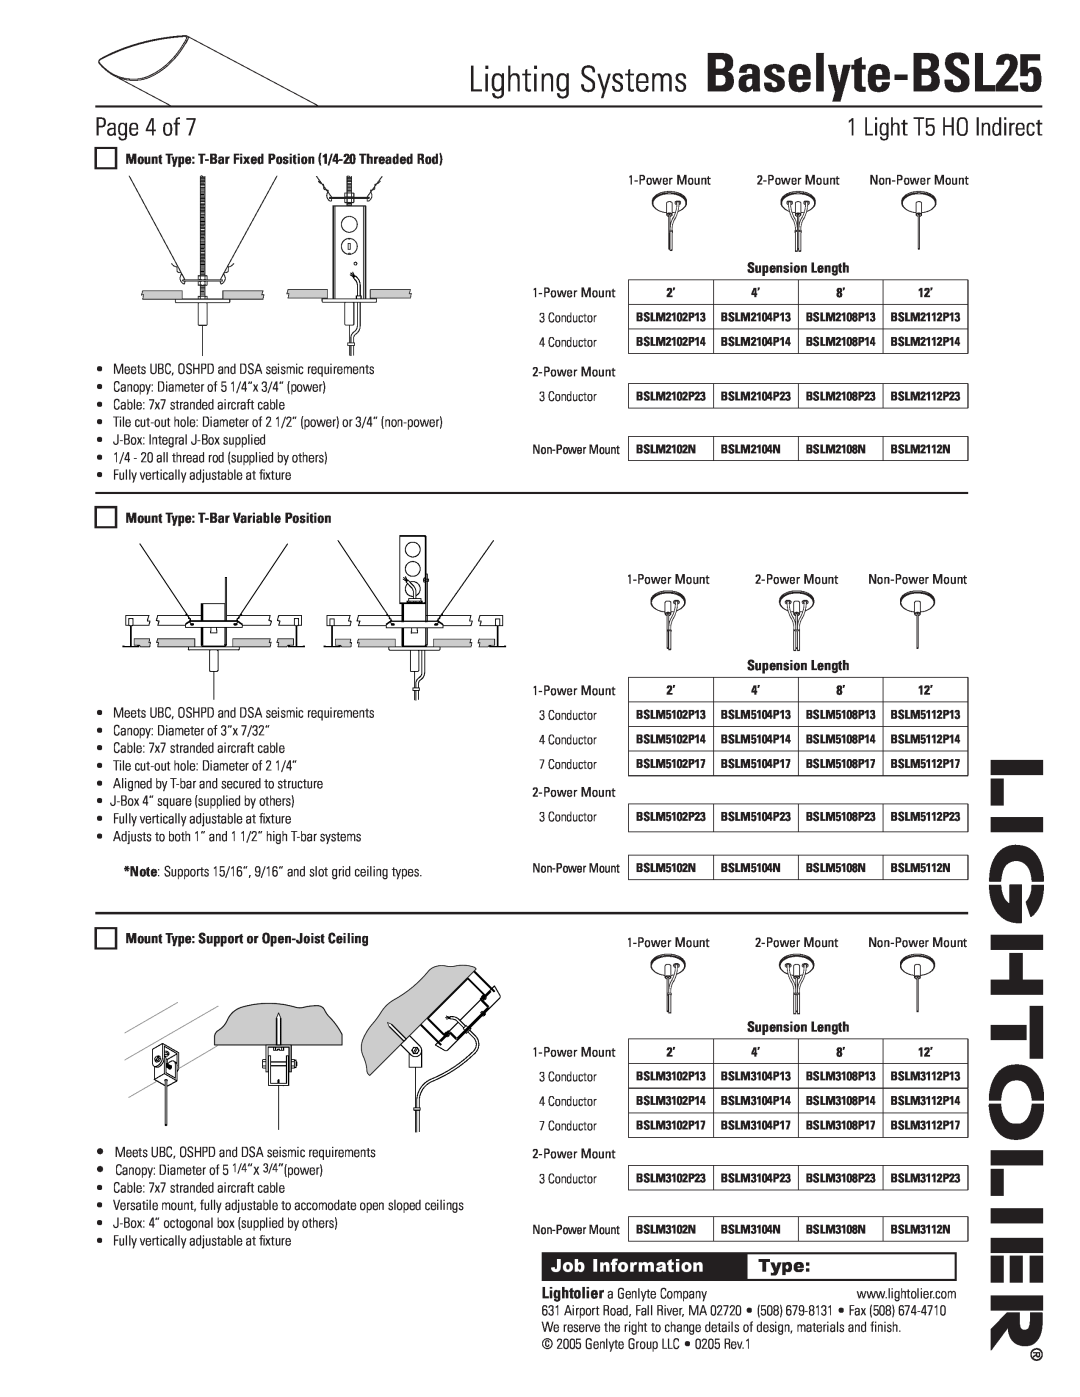 Lightolier Baselyte-BSL25 Mount Type T-BarVariable Position, Mount Type Support or Open-JoistCeiling, Page of 